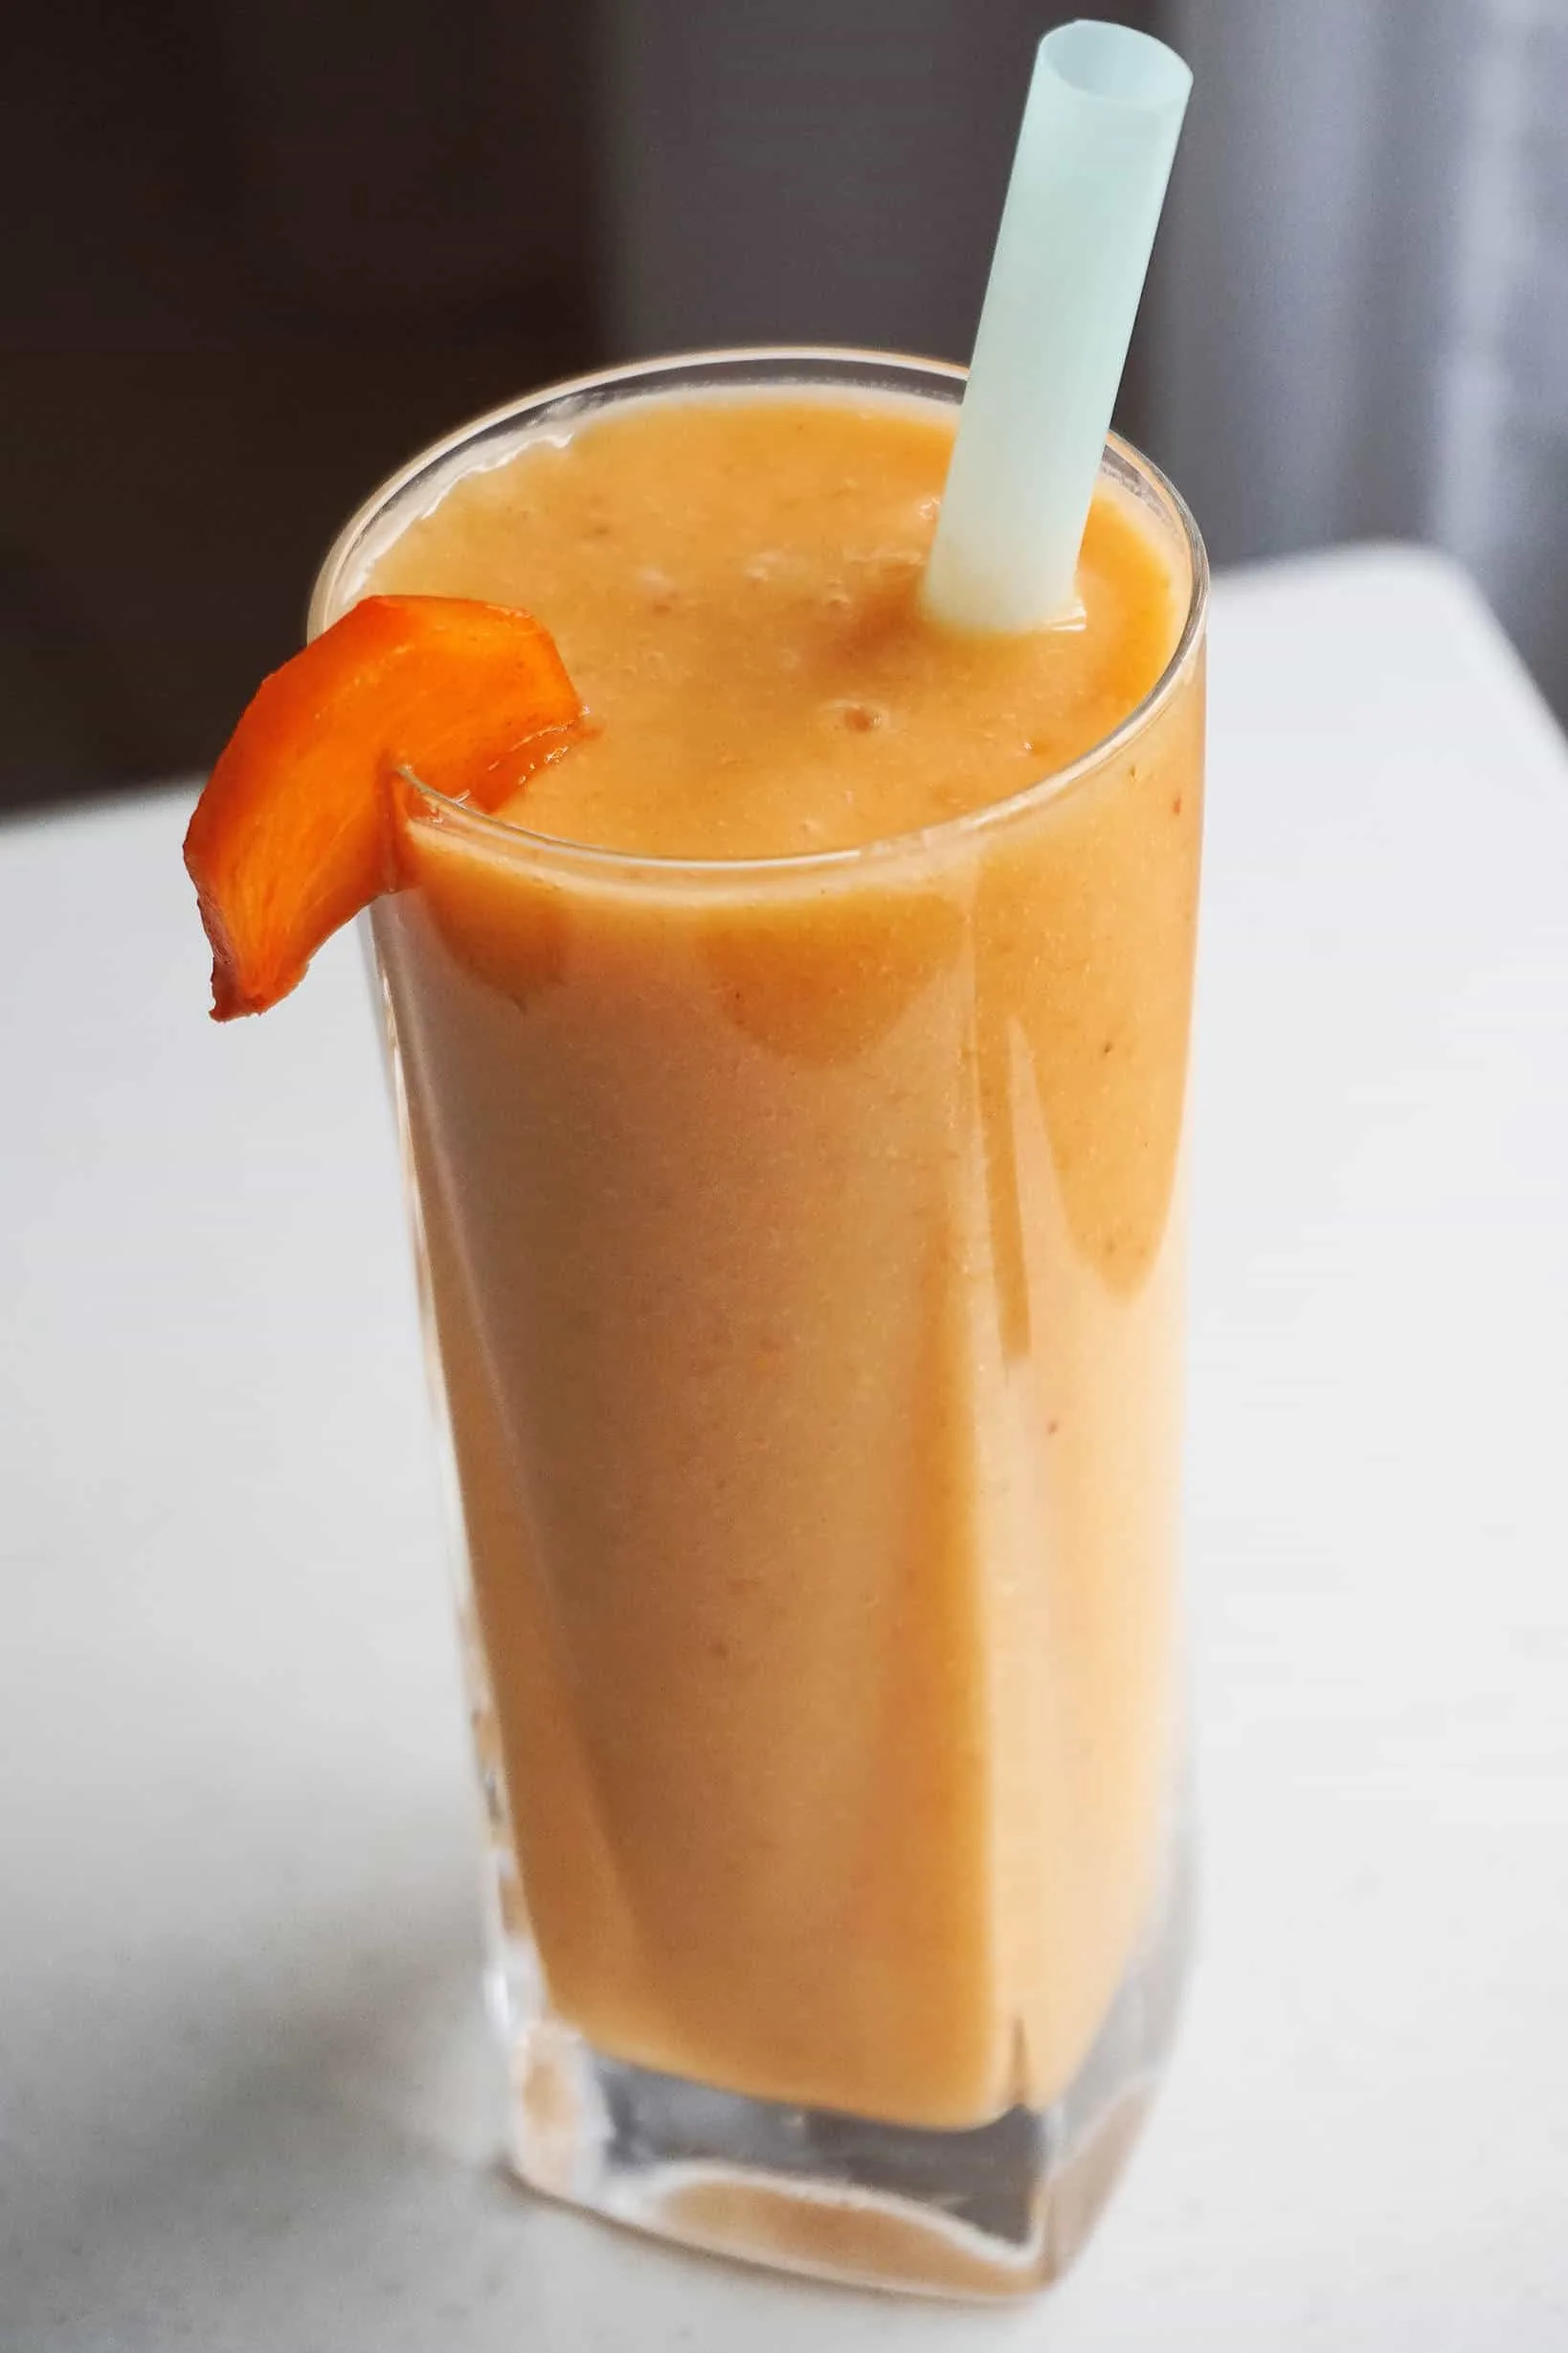 Pineapple, Persimmon & Rhubarb Smoothie - a healthy meal replacement smoothie recipe great for breakfast or snack, full of fiber and vitamins.